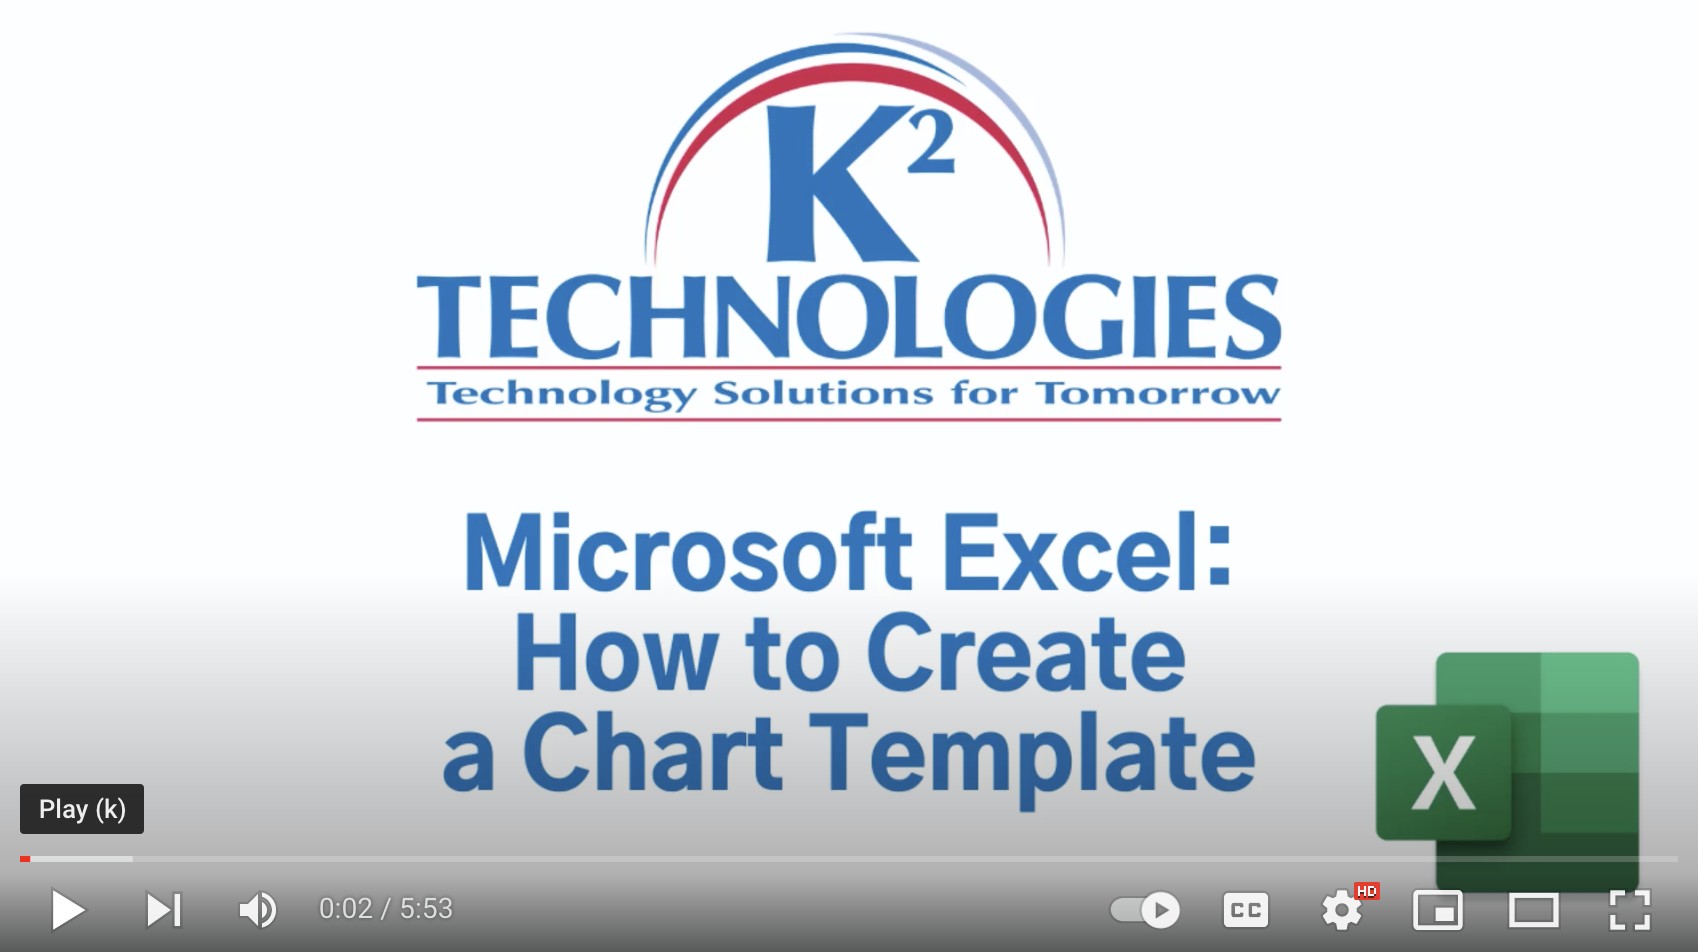 Steps to Creating a Microsoft Excel Chart Template